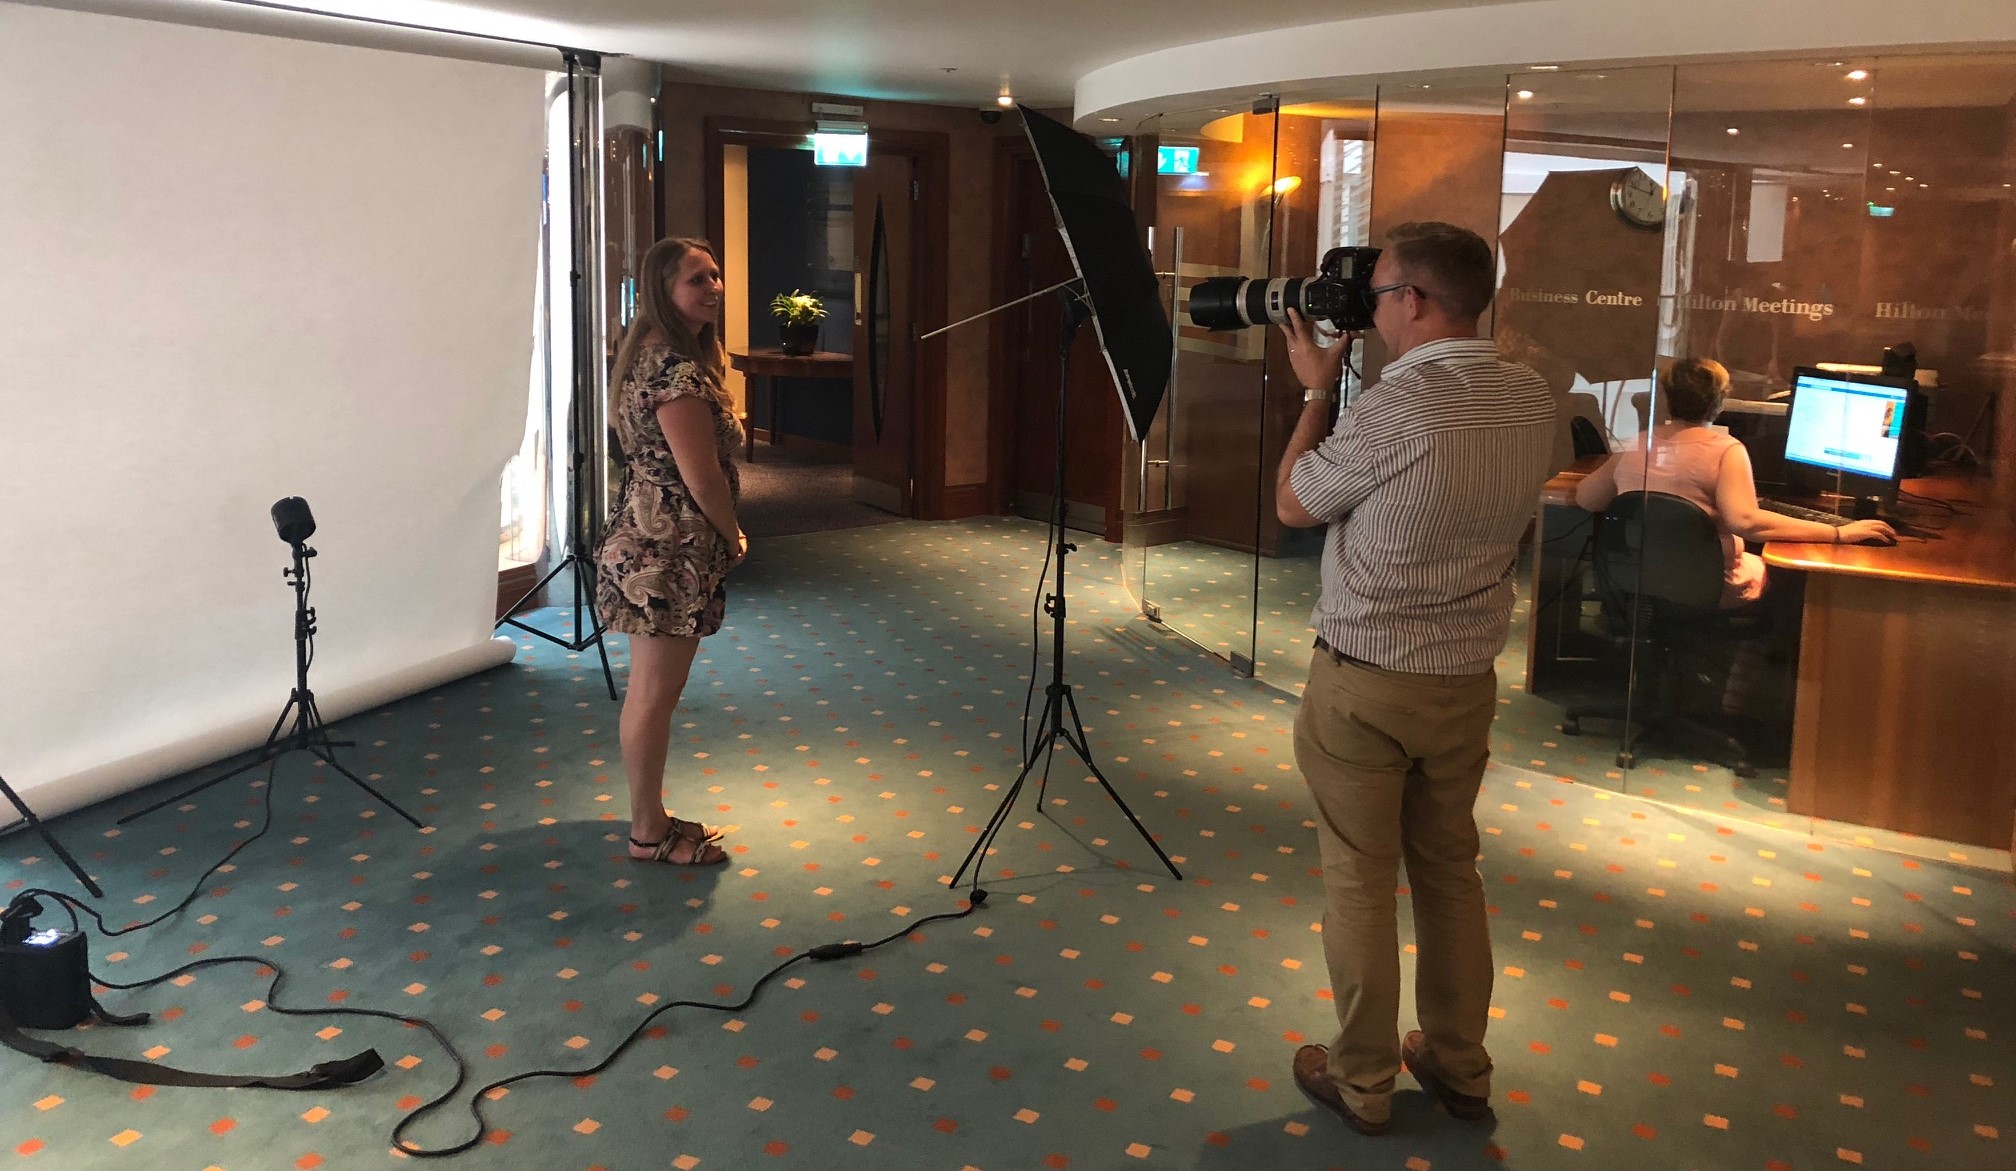 Image of Alex getting photographed for Leading Wales Awards